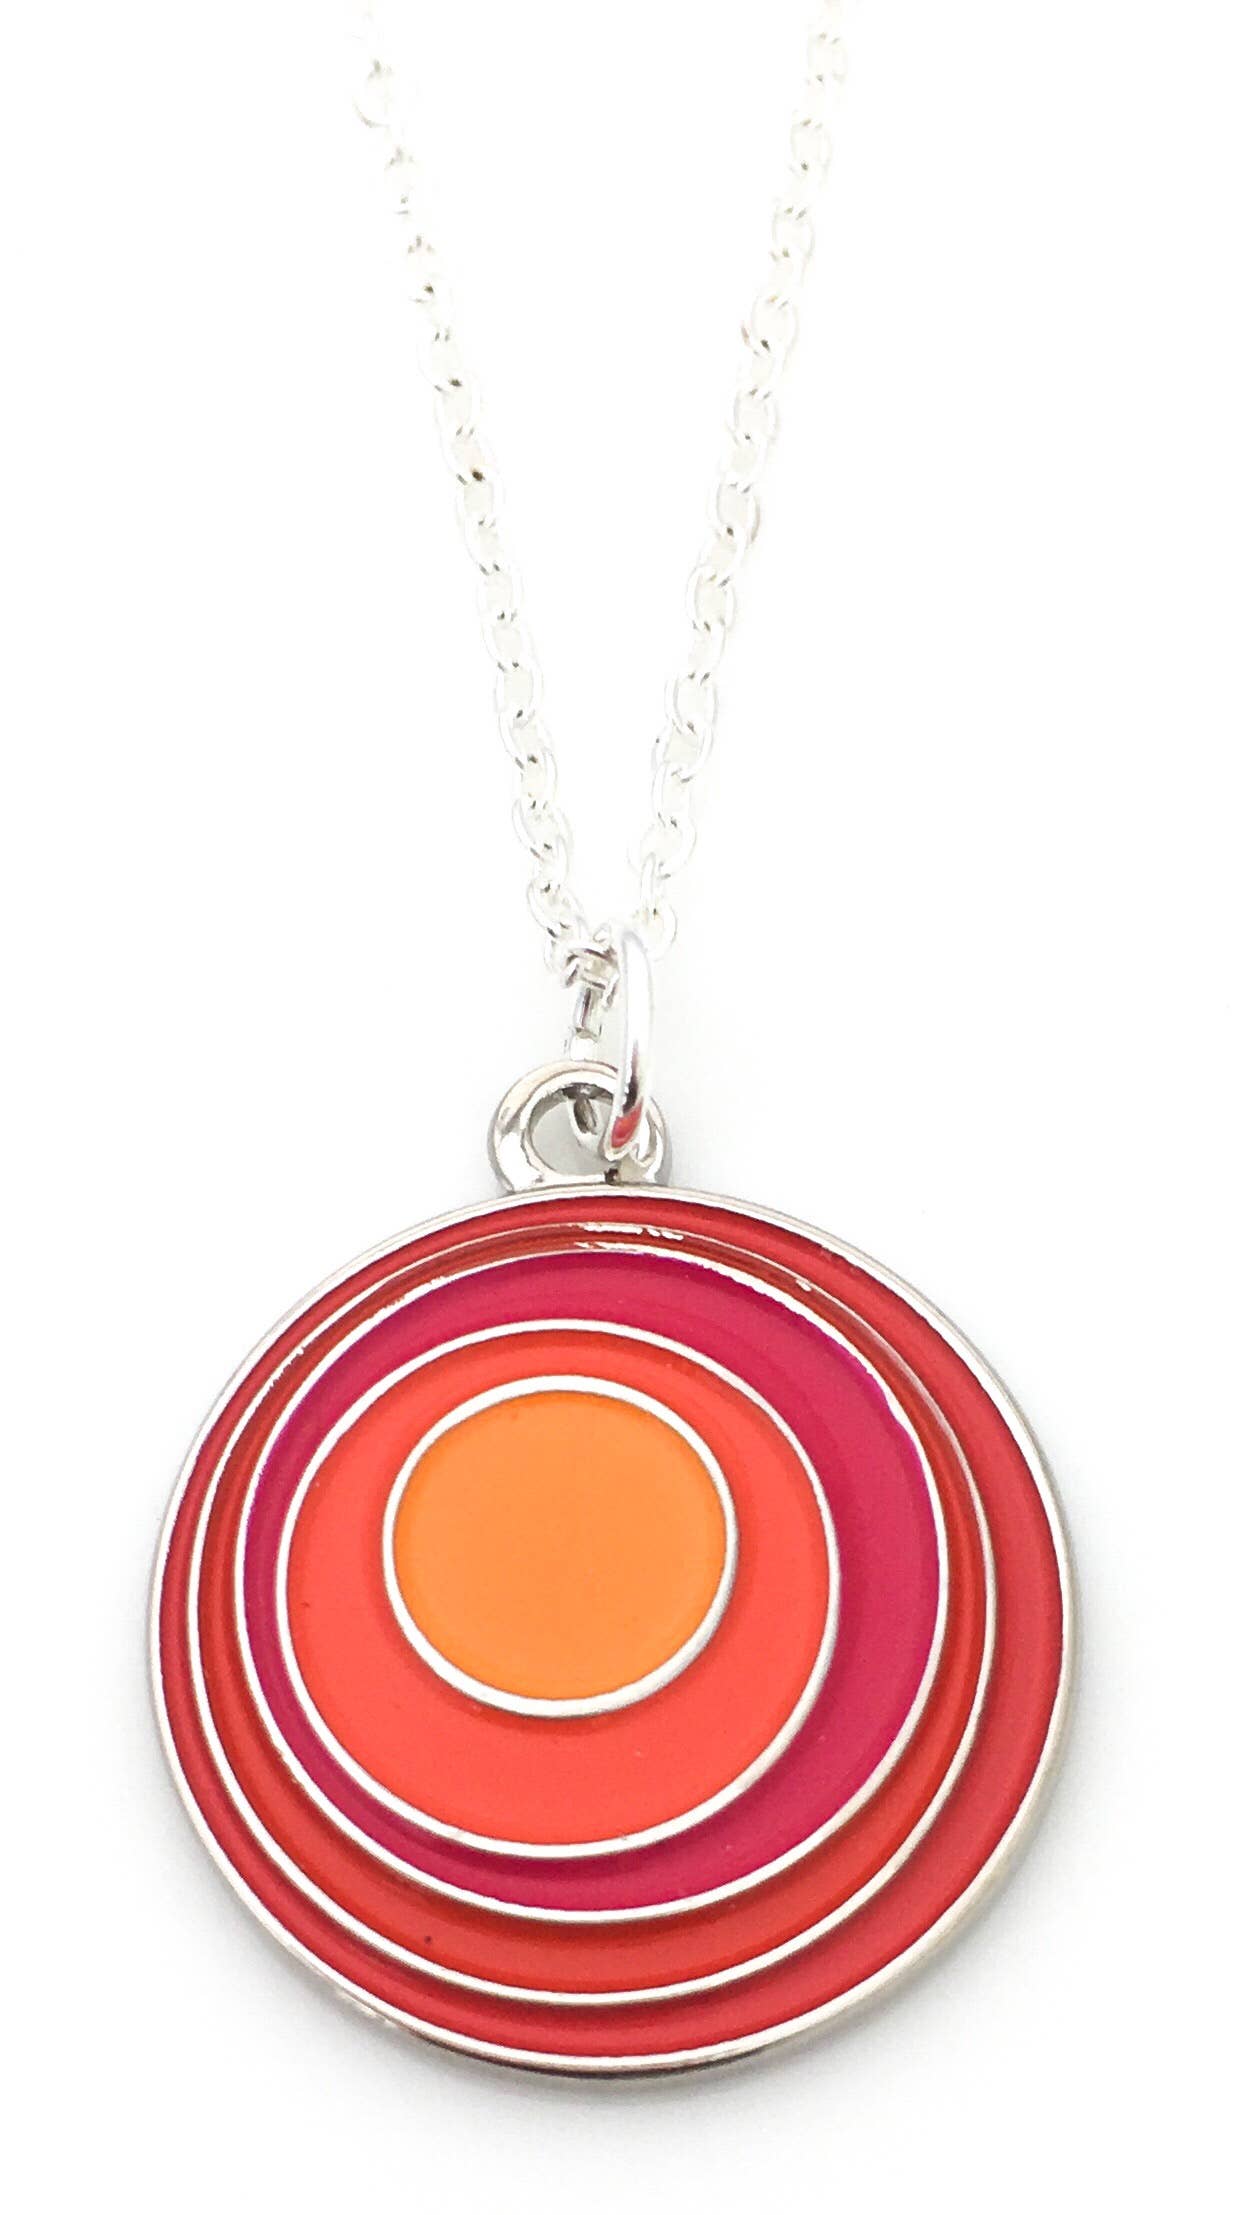 Round necklace with circles within circles in oranges